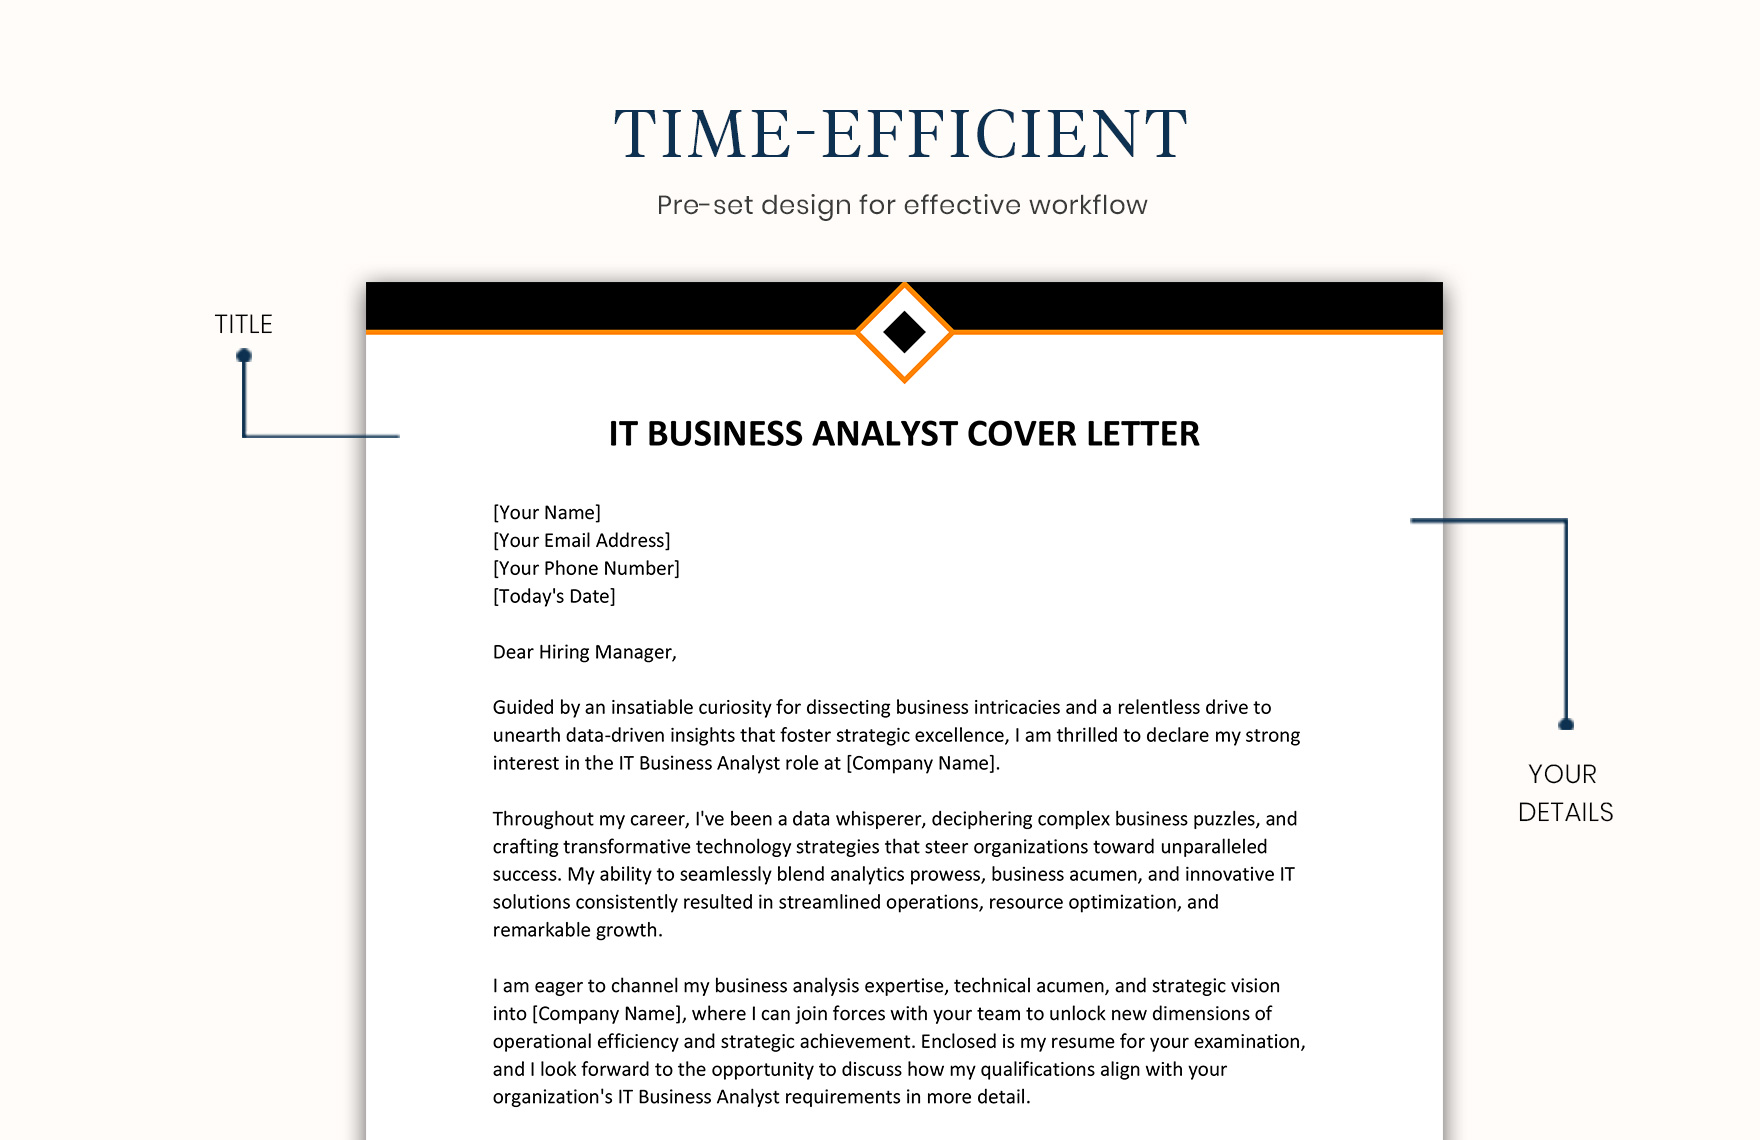 IT Business Analyst Cover Letter